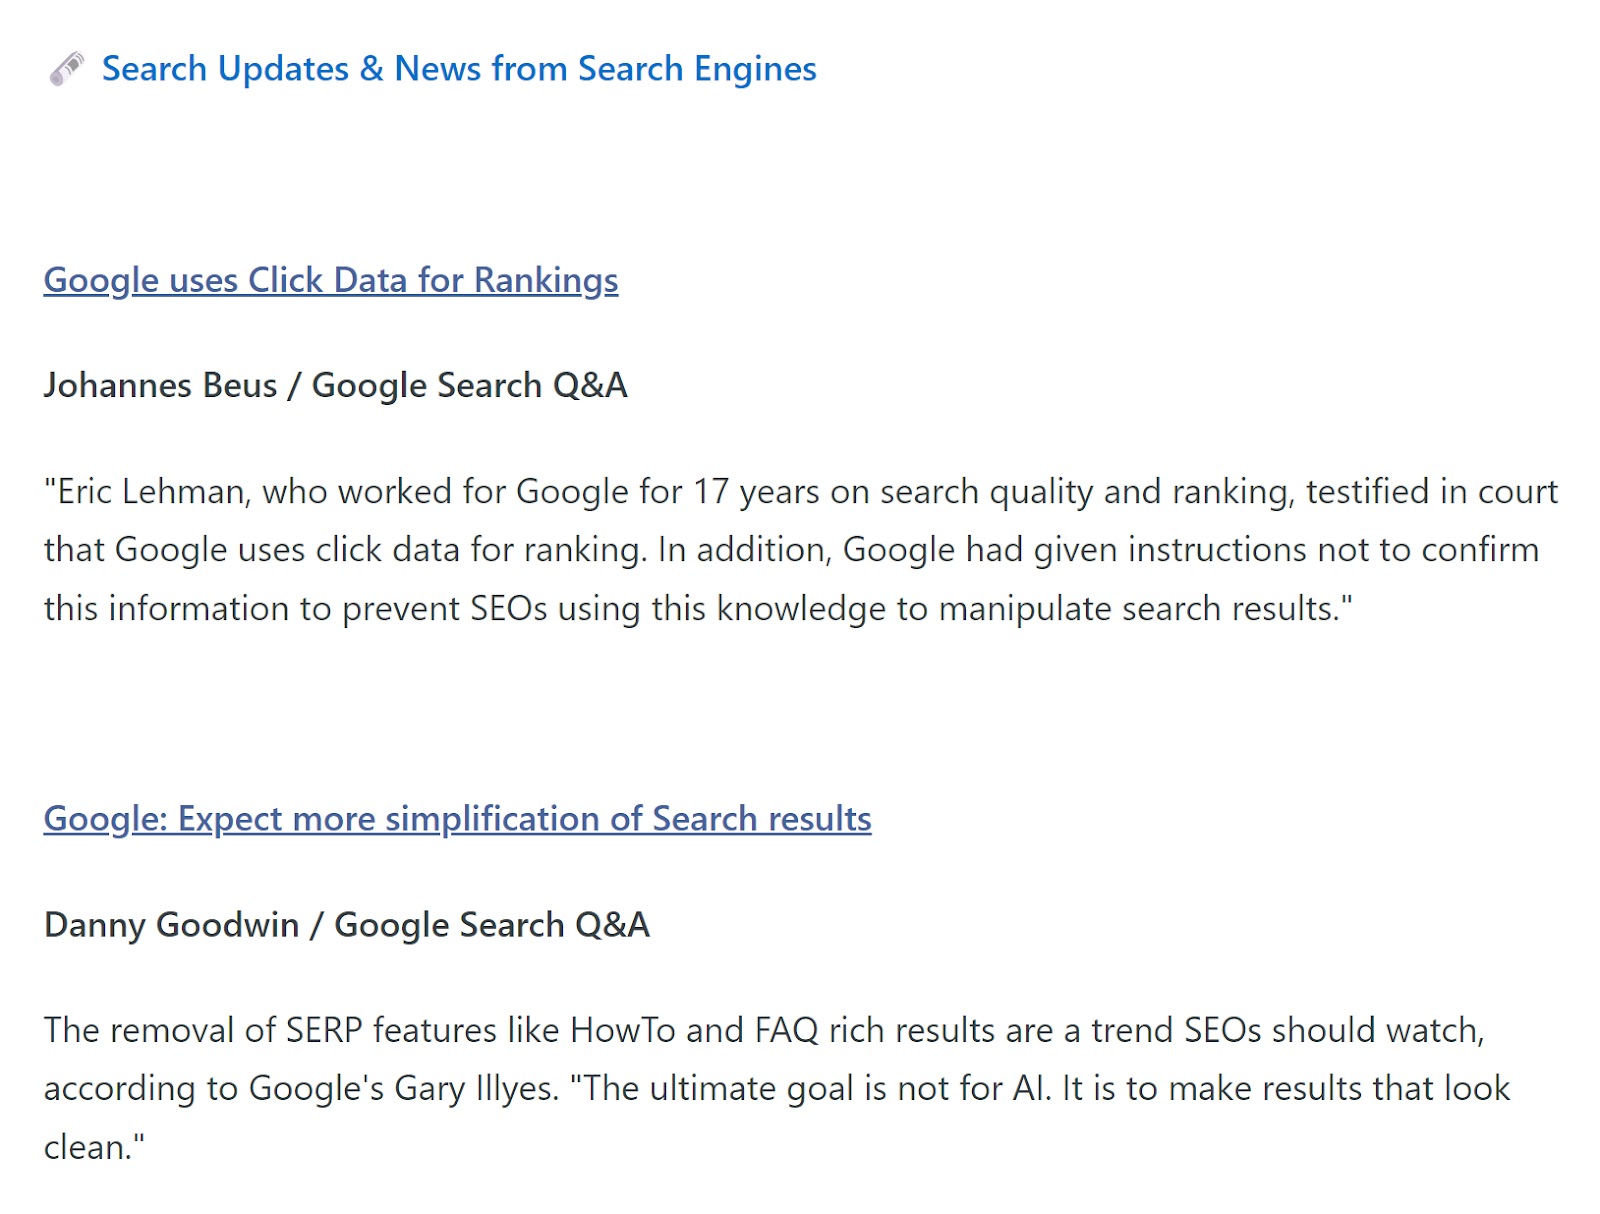 "Search Updates & News from Search Engine" section of #SEOFOMO newsletter